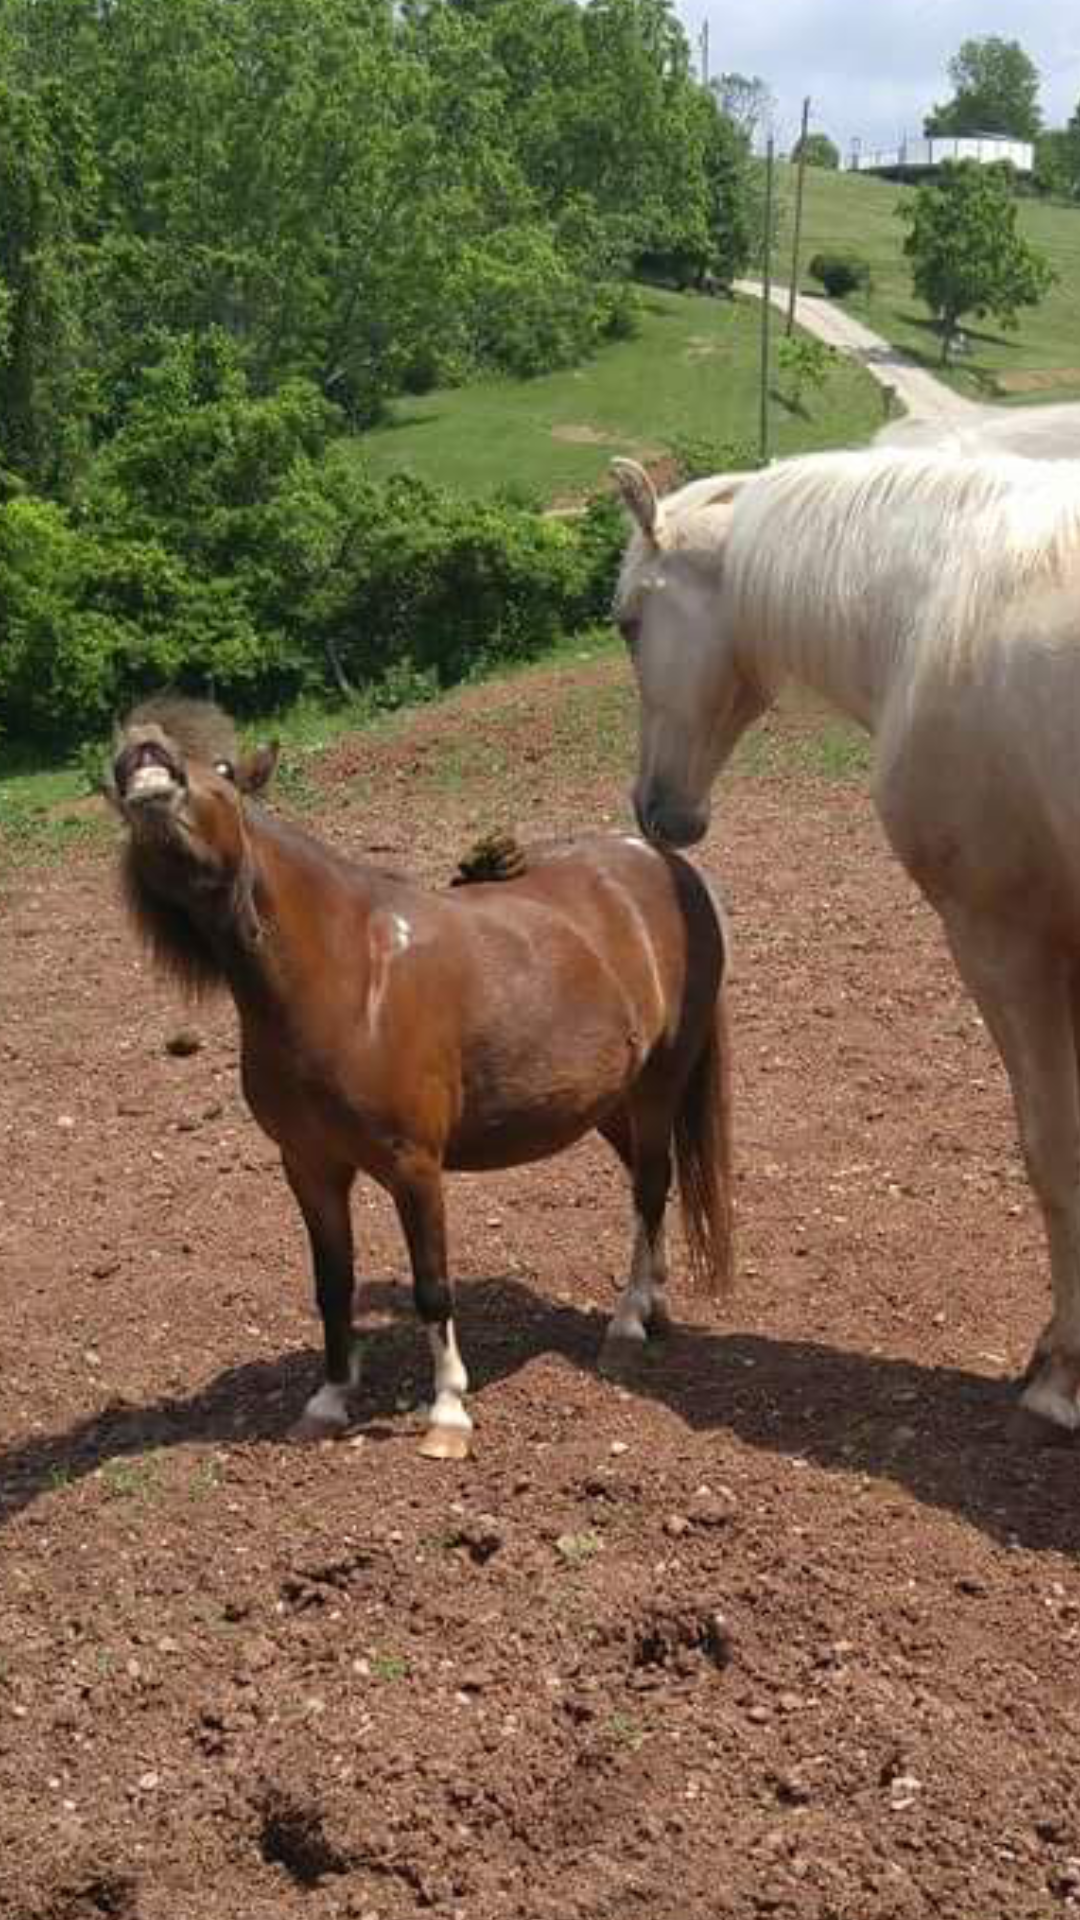 Horse poops on another horses back - Album on Imgur